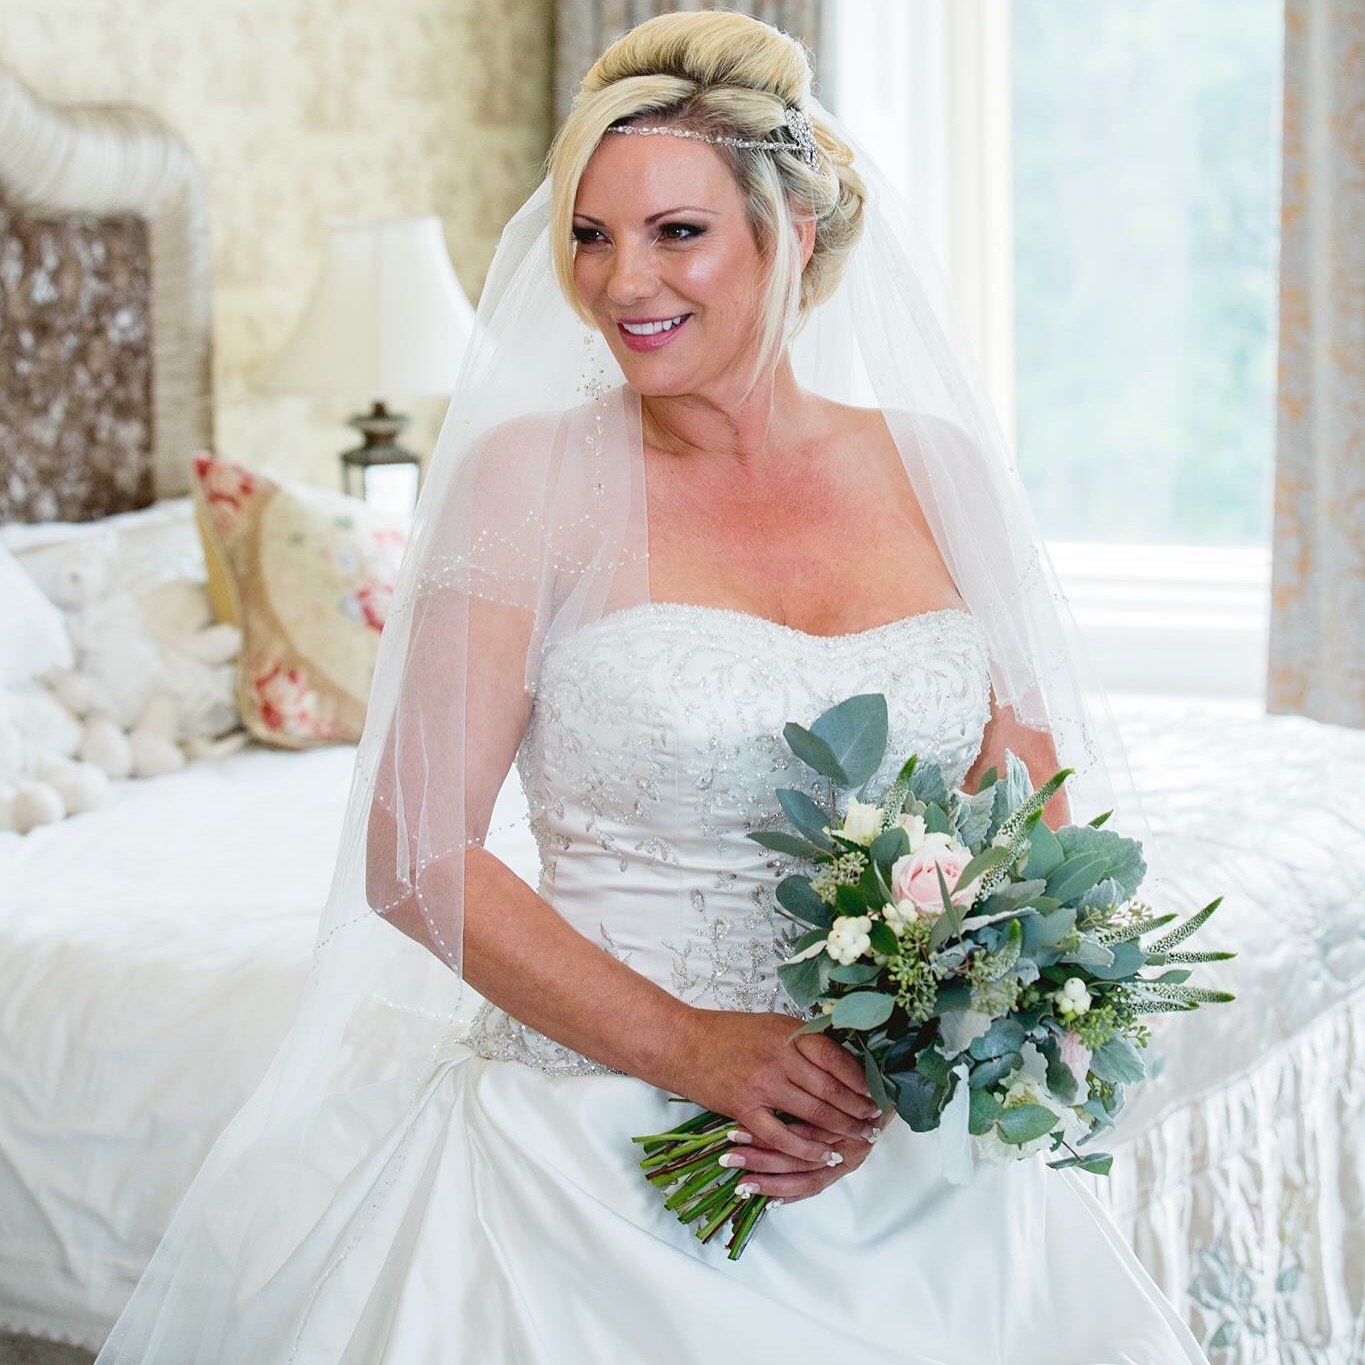  Bride wearing a long white, strapless wedding dress and white veil is sat on the corner of a bed made up with white bed linen. The bride is looking away from the camera holding her hand tied bouquet created with green foliage and white blooms.    Ph